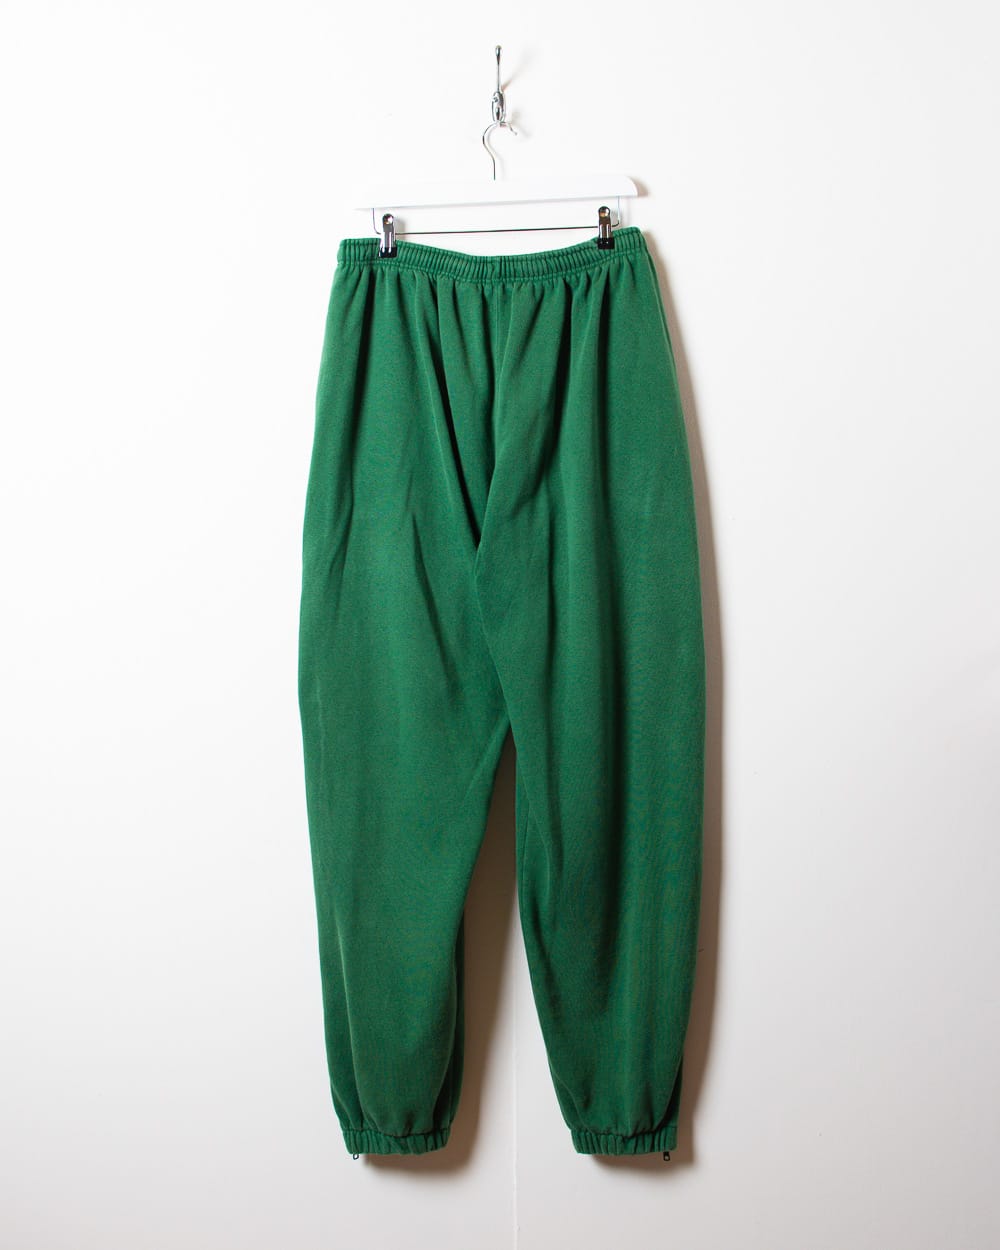 Green Nike Team Tracksuit Bottoms - X-Large